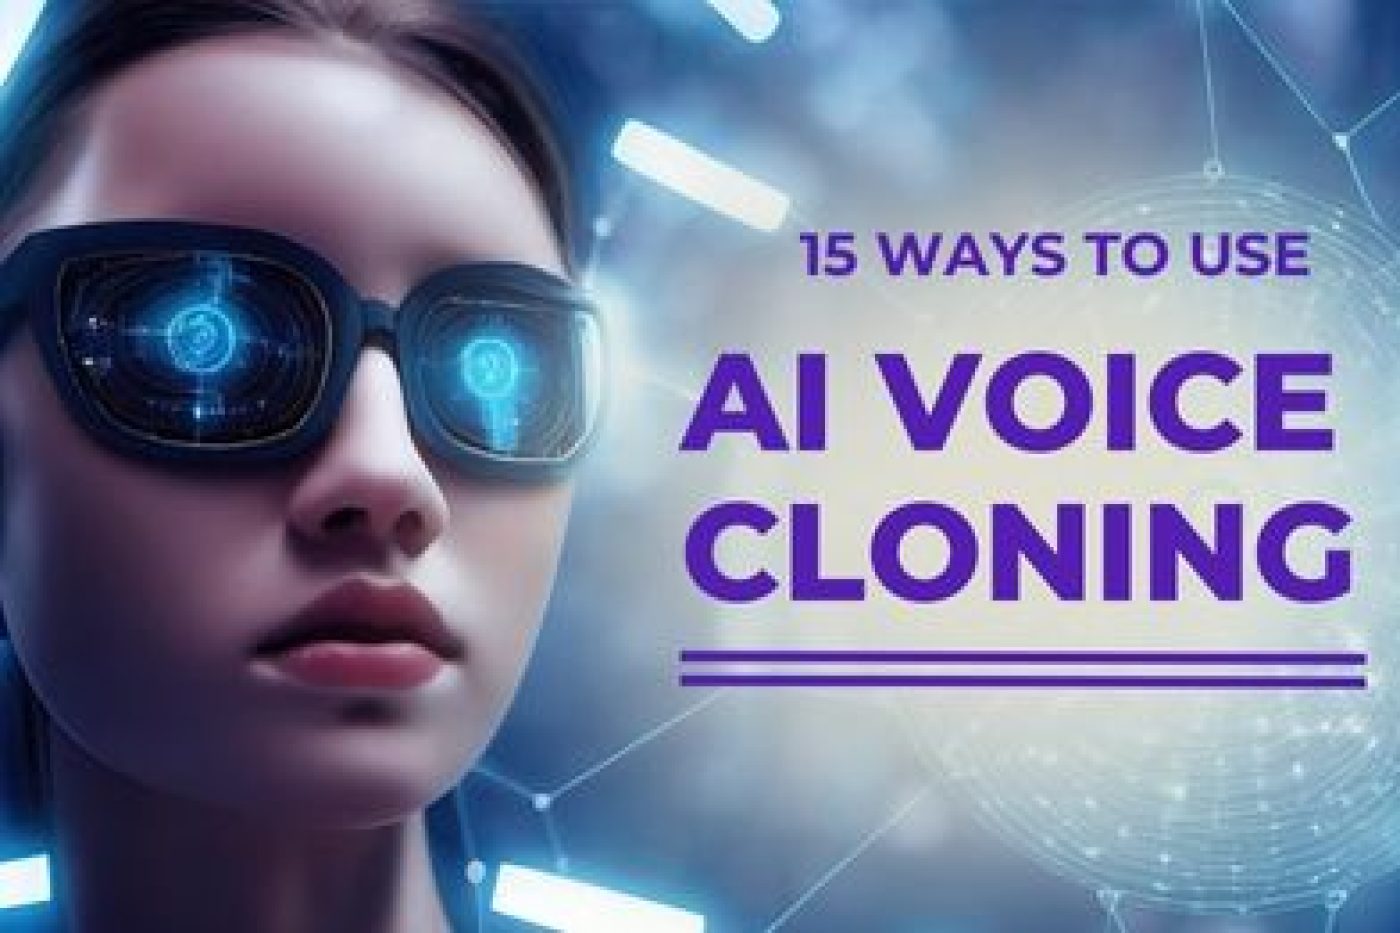 Clone Your Voice: 15 Ways to Use AI Voice Cloning Technology